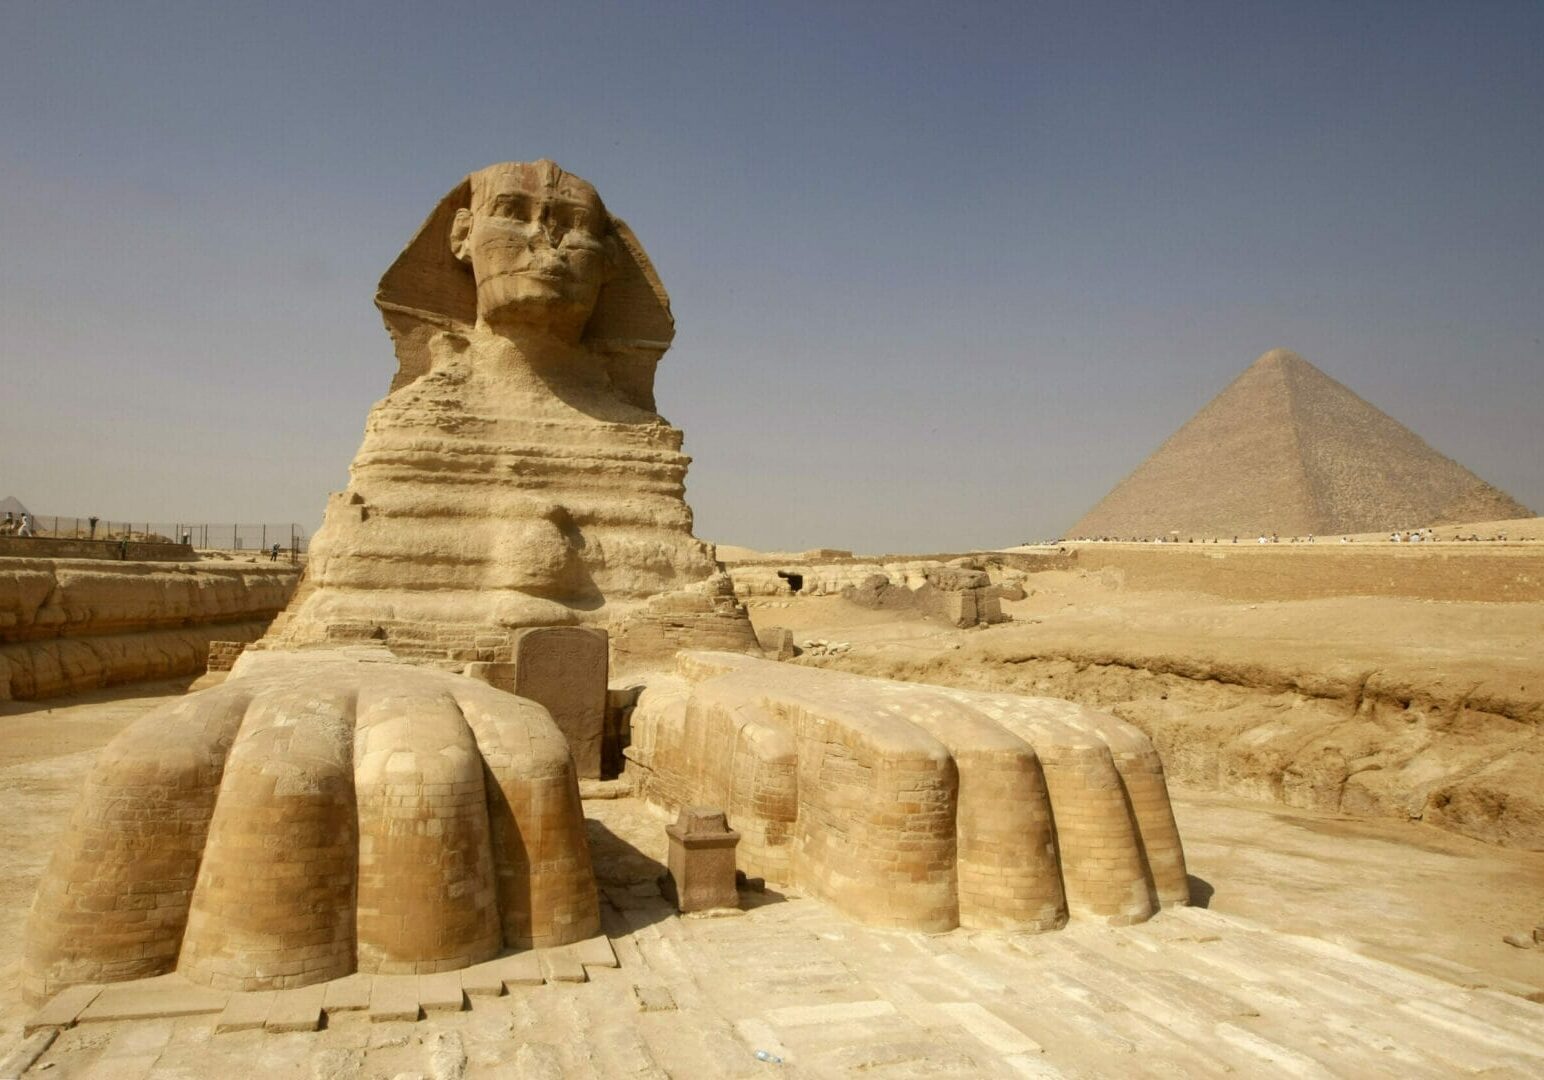 The Sphinx of Giza and the Pyramid of Giza in Egypt